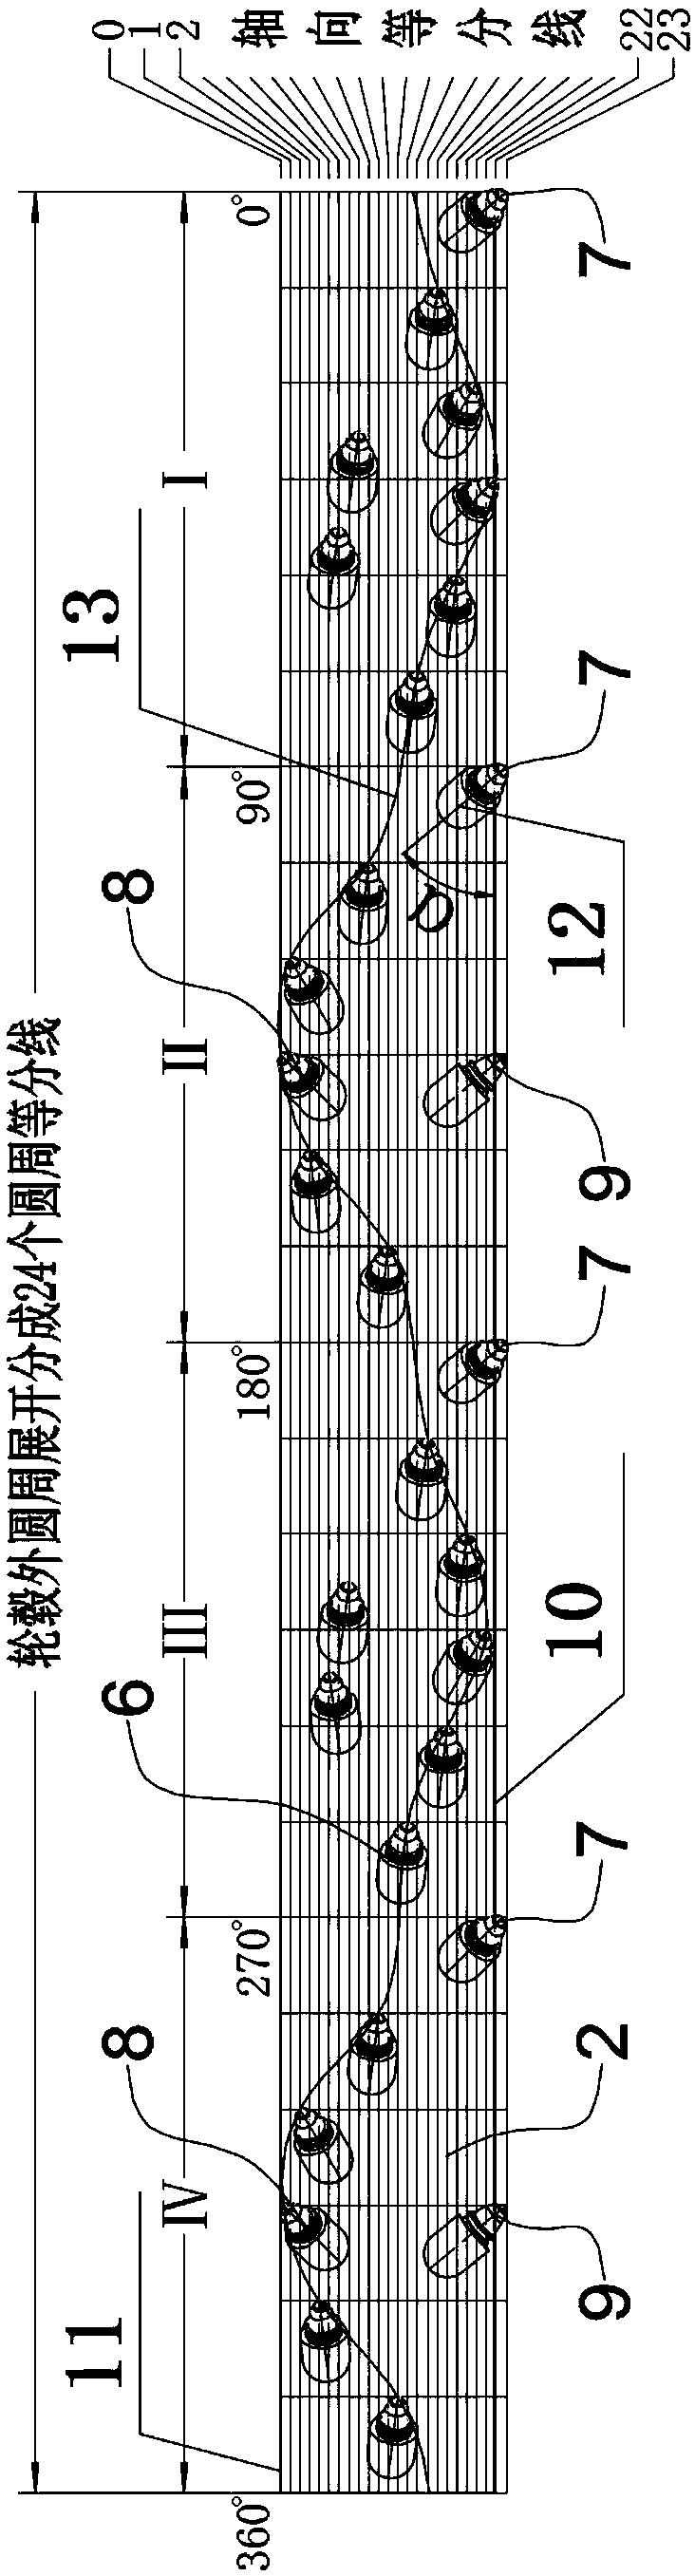 Tooth distribution system for milling wheel of double-wheel slot milling machine